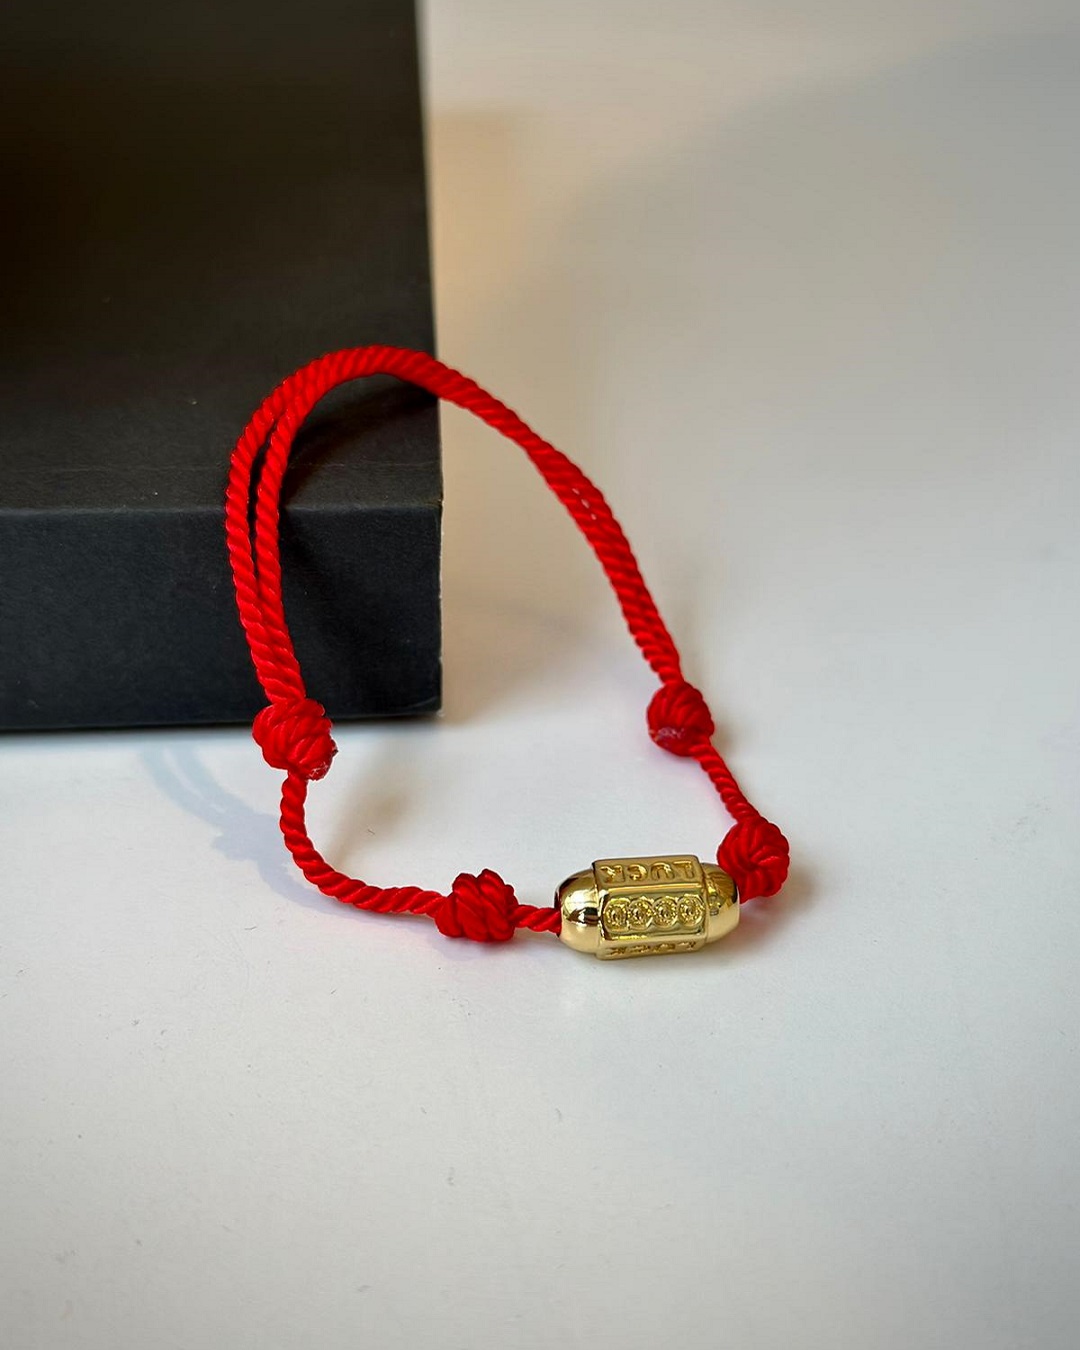 Red woven friendship bracelet with gold plated diamantes on it